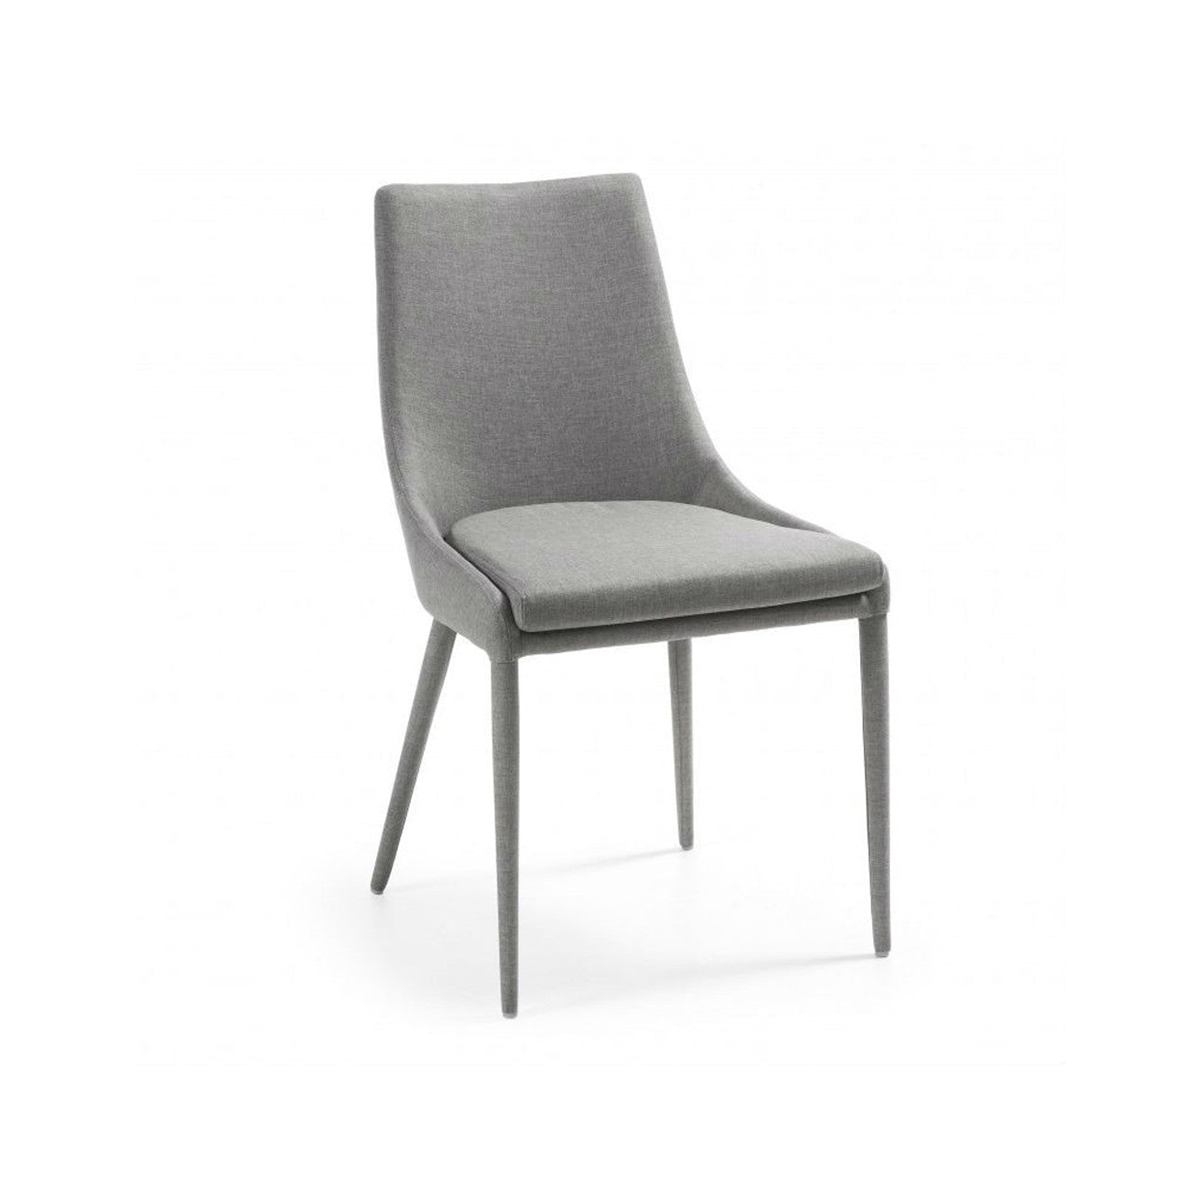 FondHouse Boone Dining Chair Light Grey